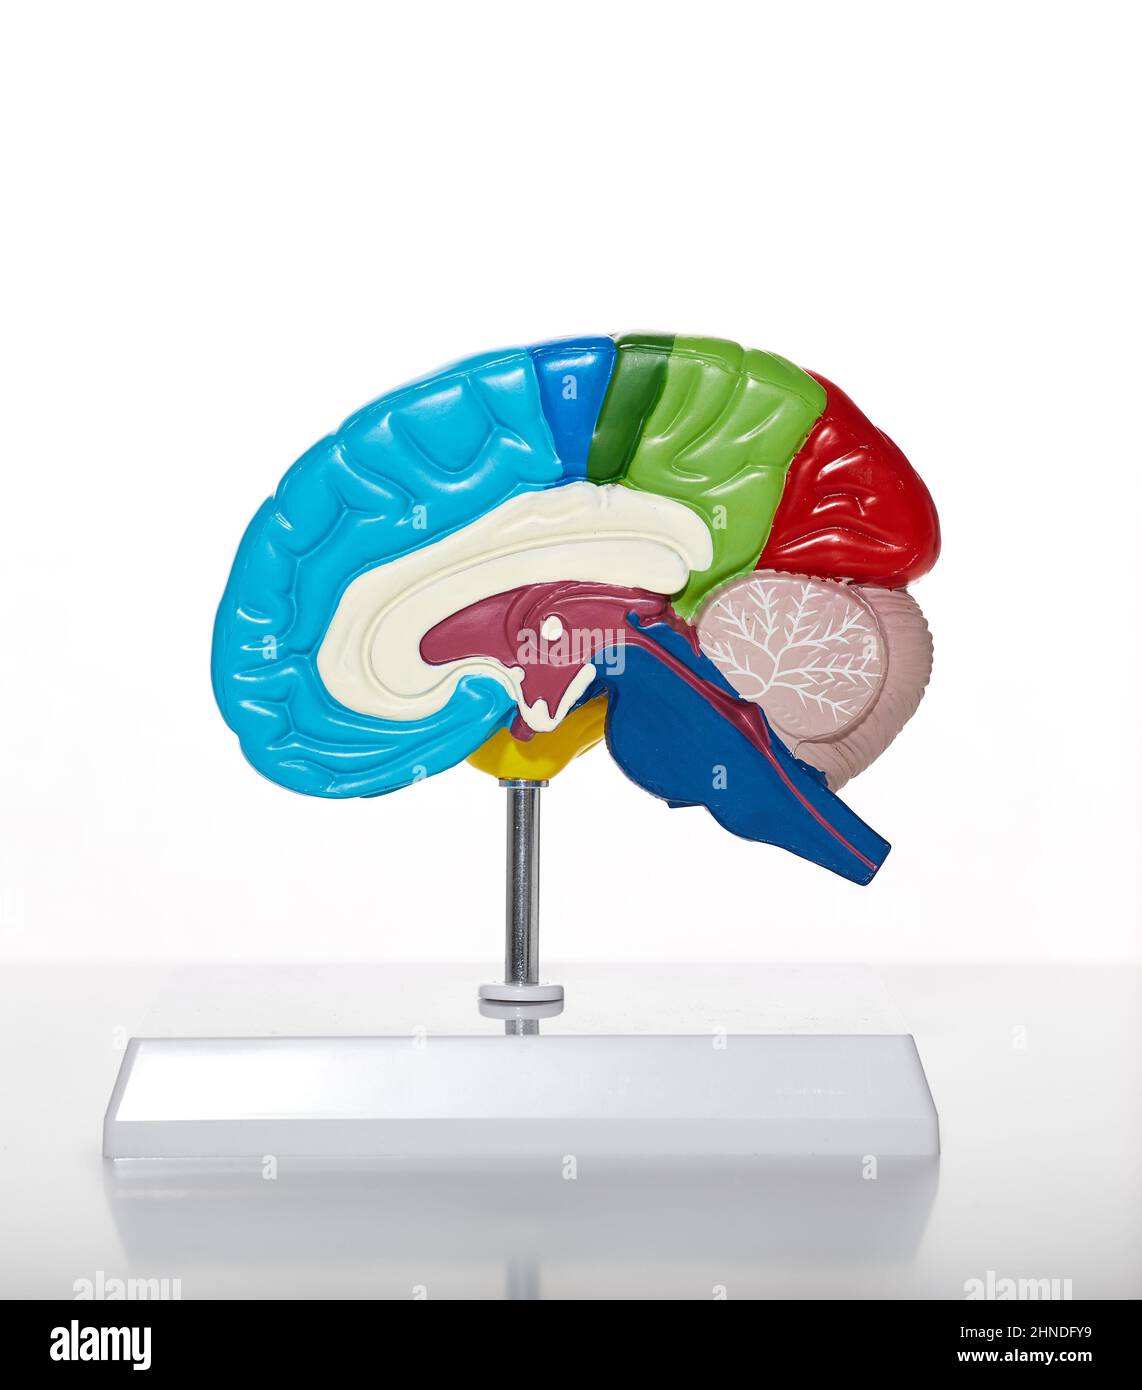 Anatomical model of human brain for medical education, close-up. Brain health concept in healthcare Stock Photo